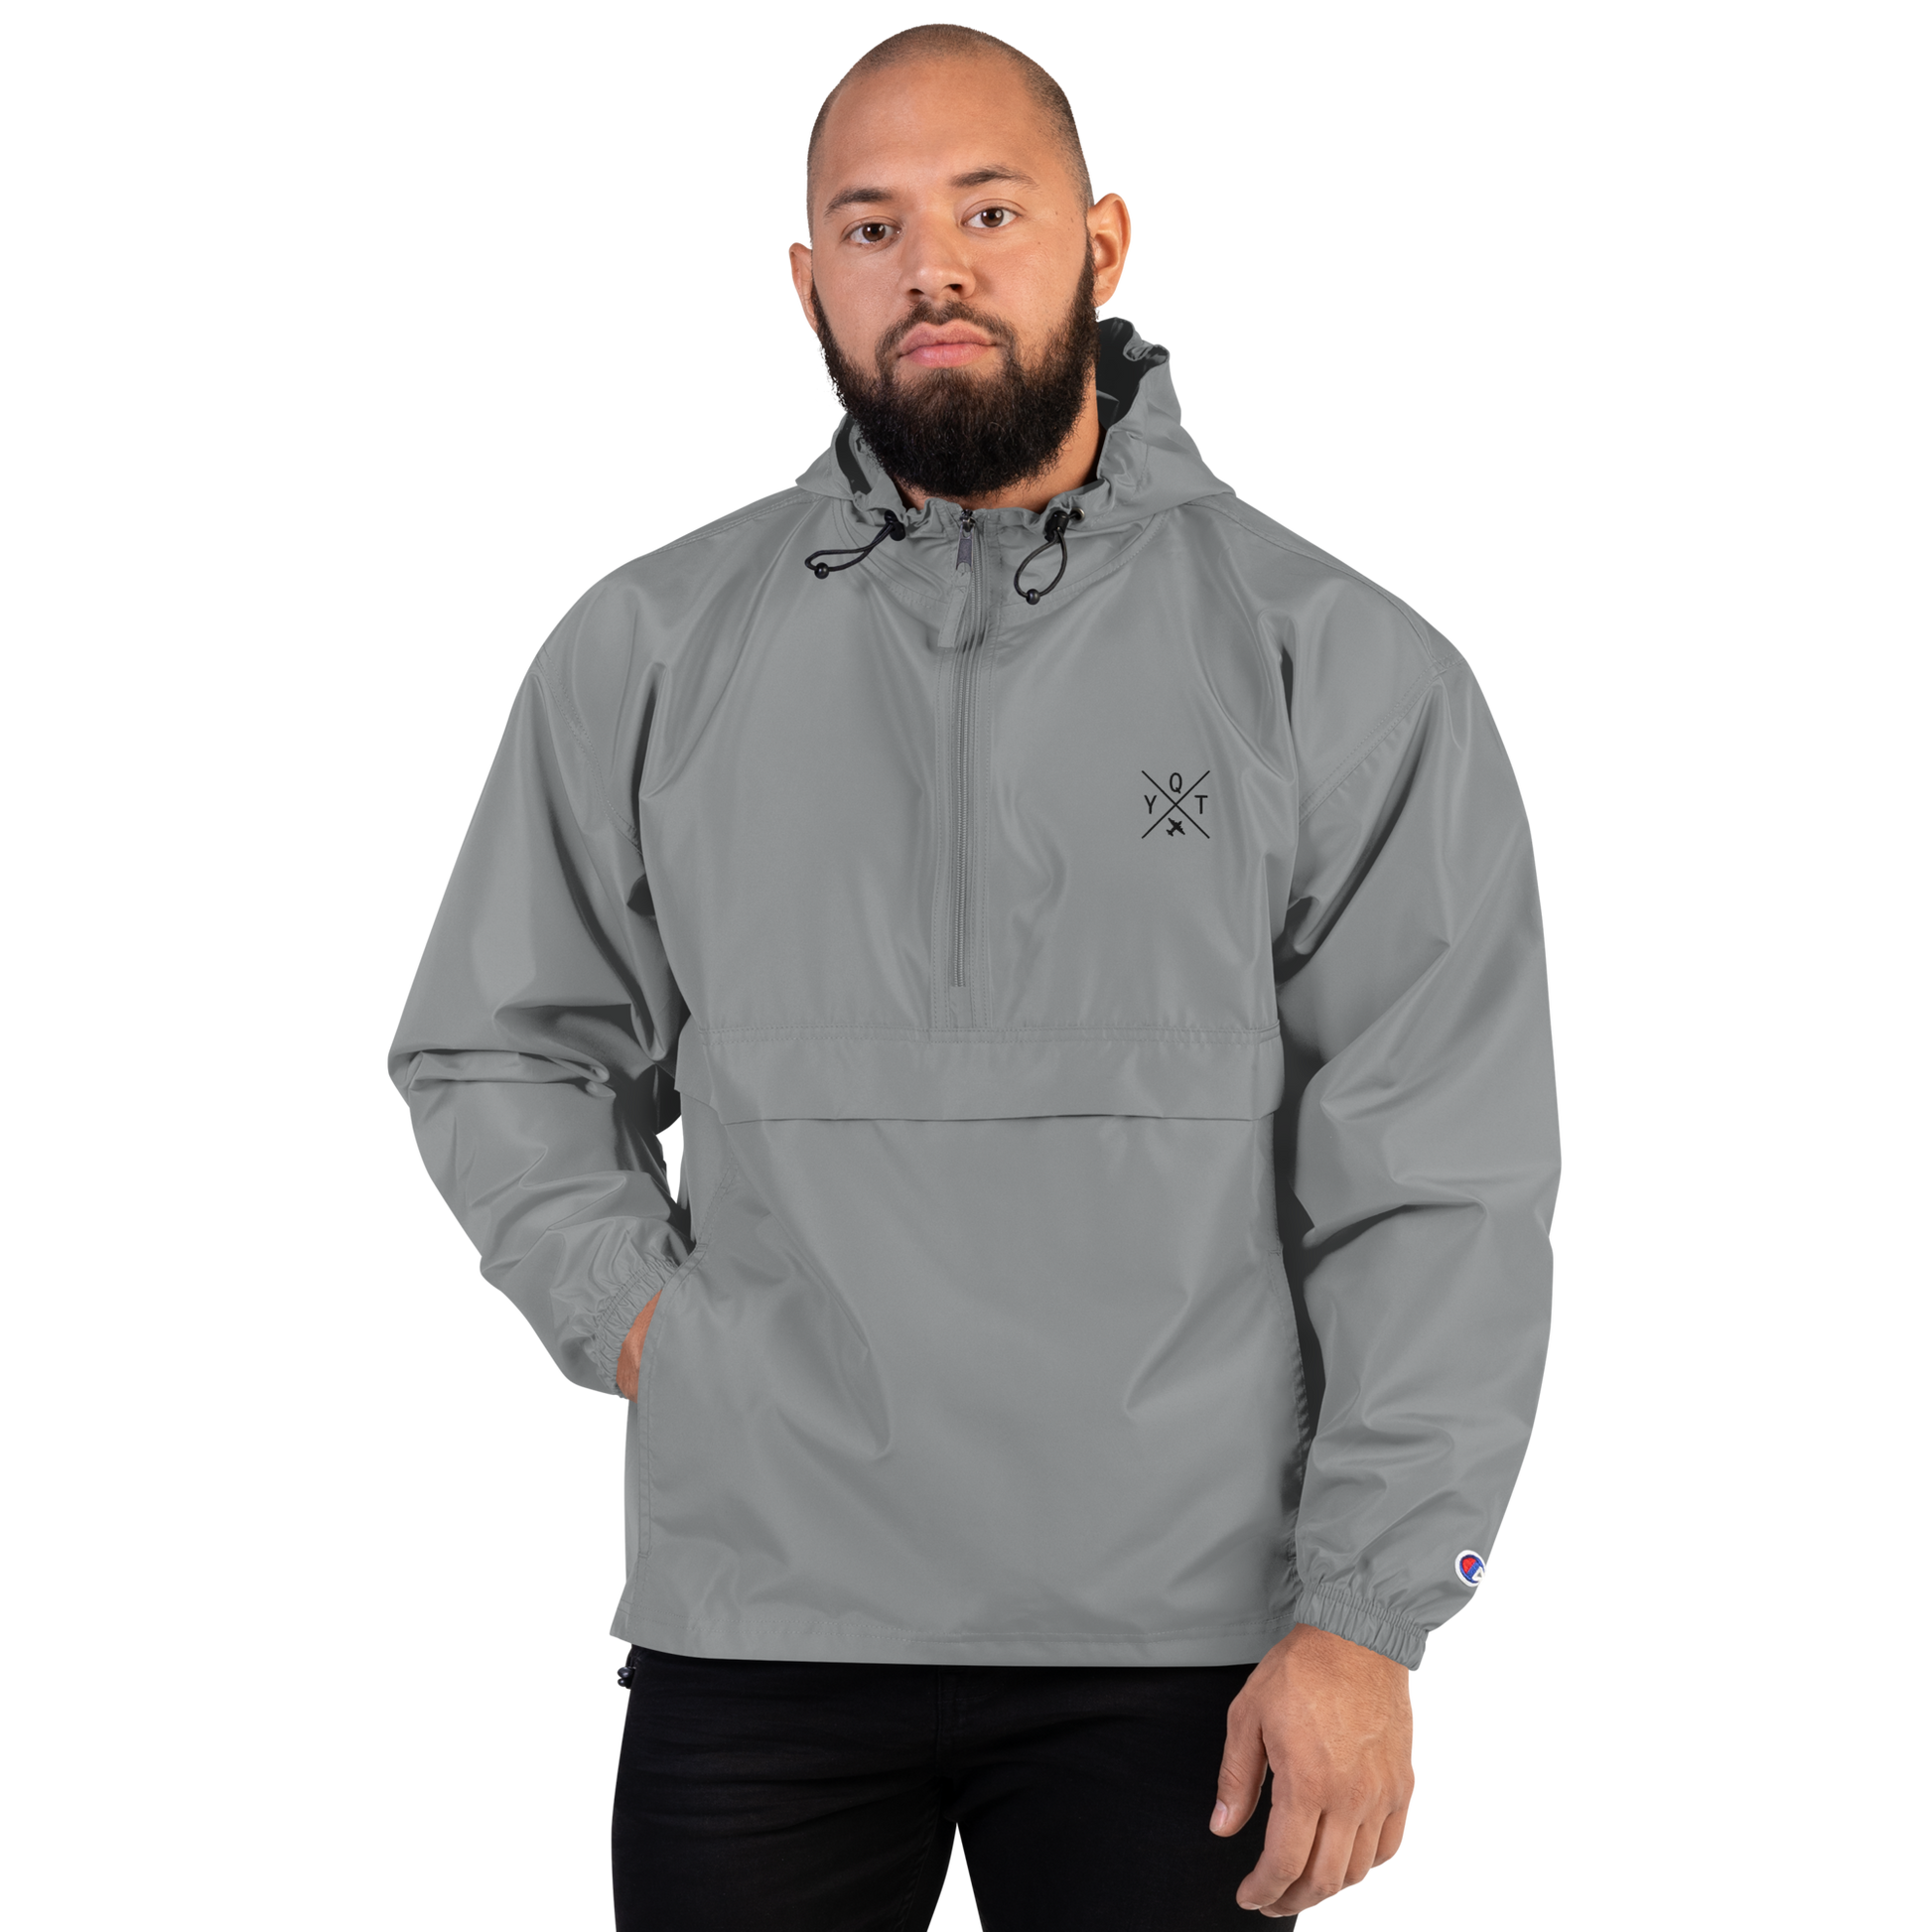 Crossed-X Packable Jacket • YQT Thunder Bay • YHM Designs - Image 15